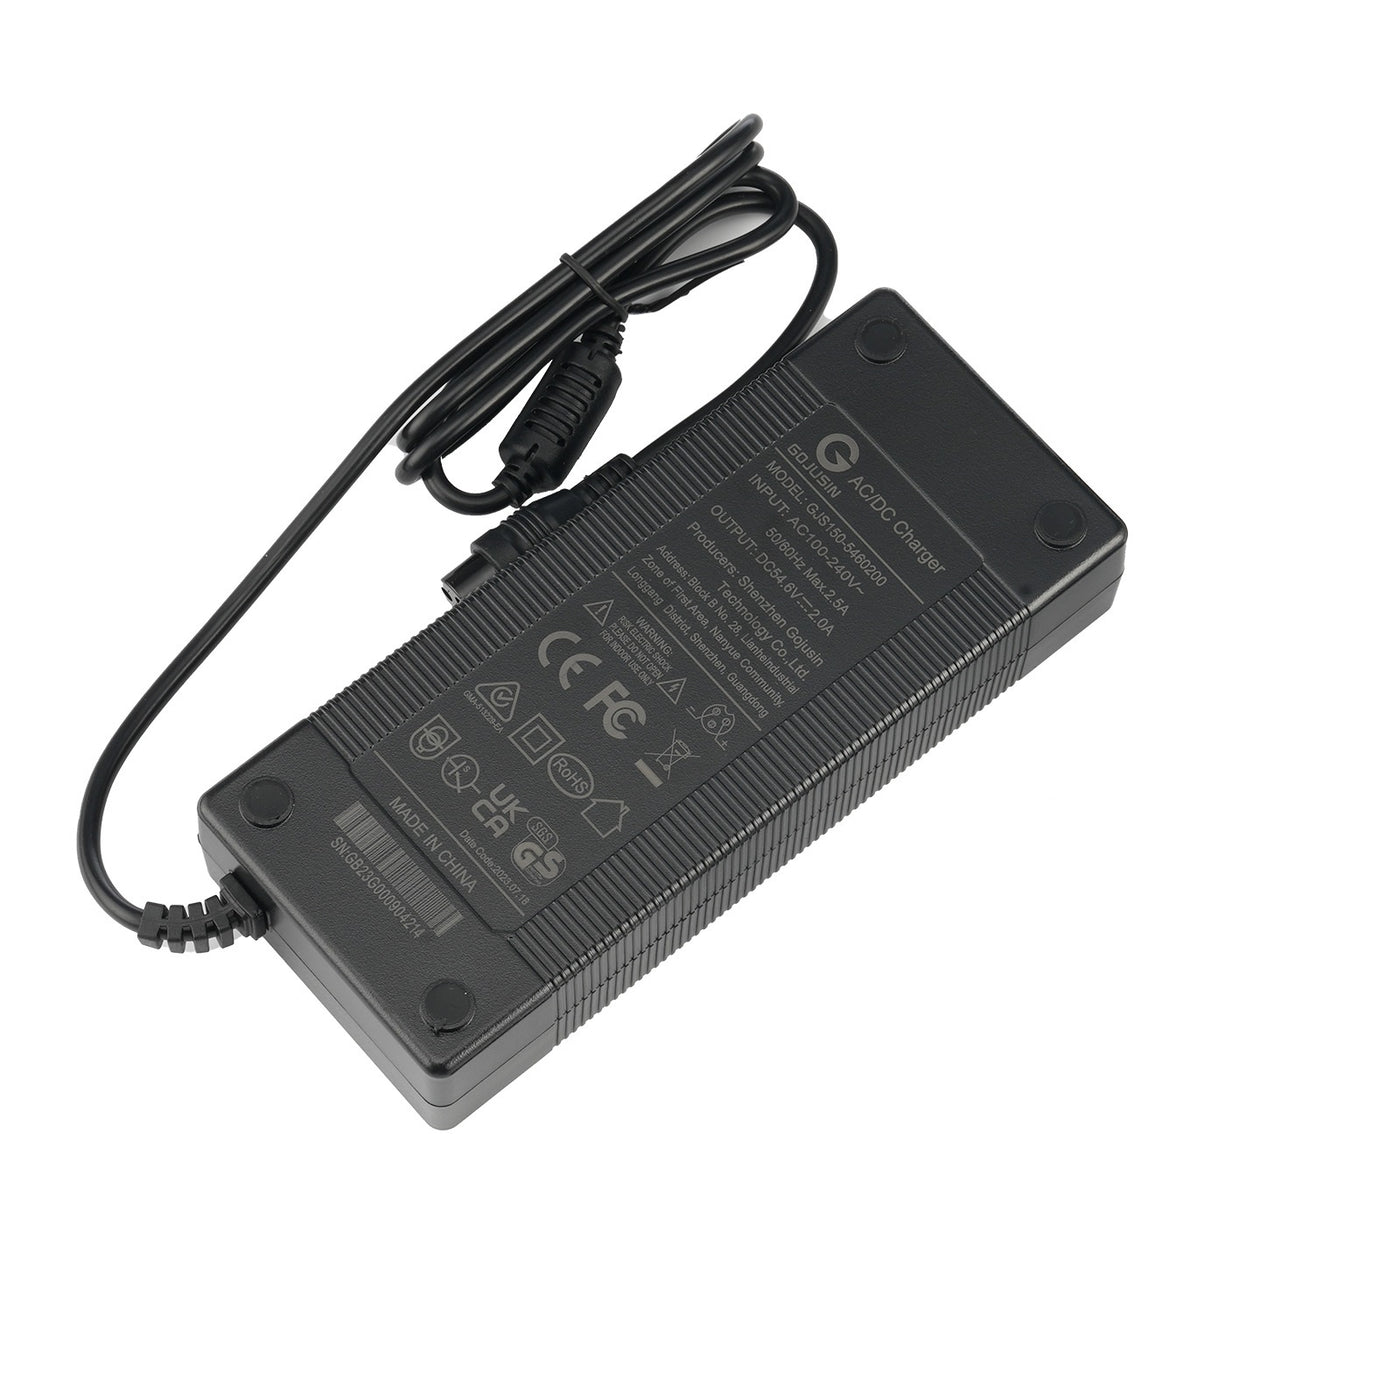 Charger Adapter for Electric Scooter iX5/iX6